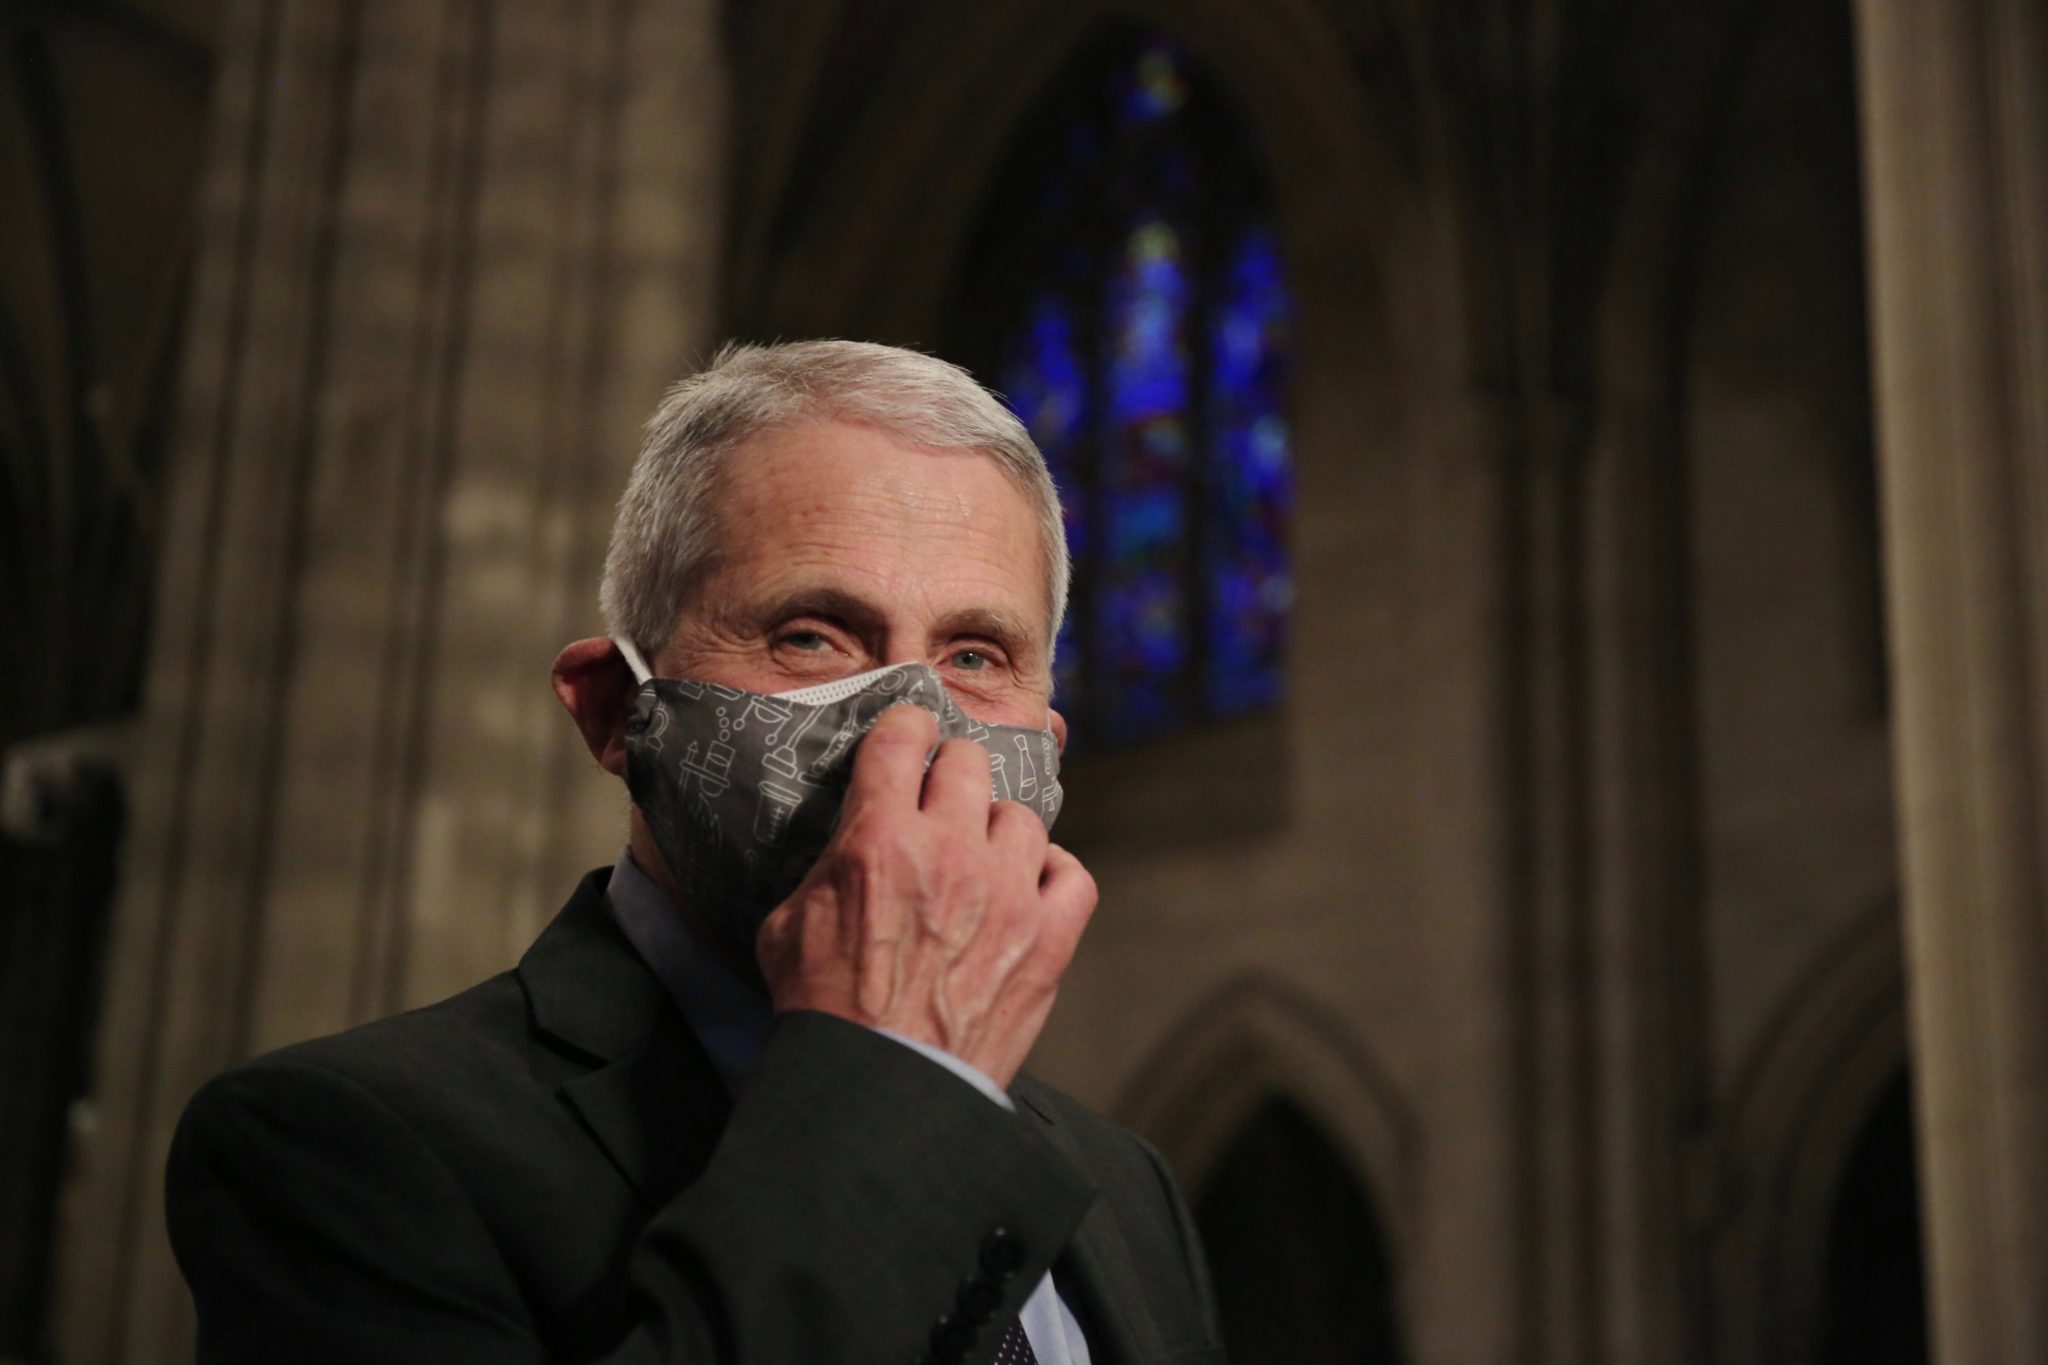 PHOTOS: Anthony Fauci at Washington National Cathedral’s Vaccination Event for DC-Area Religious Leaders